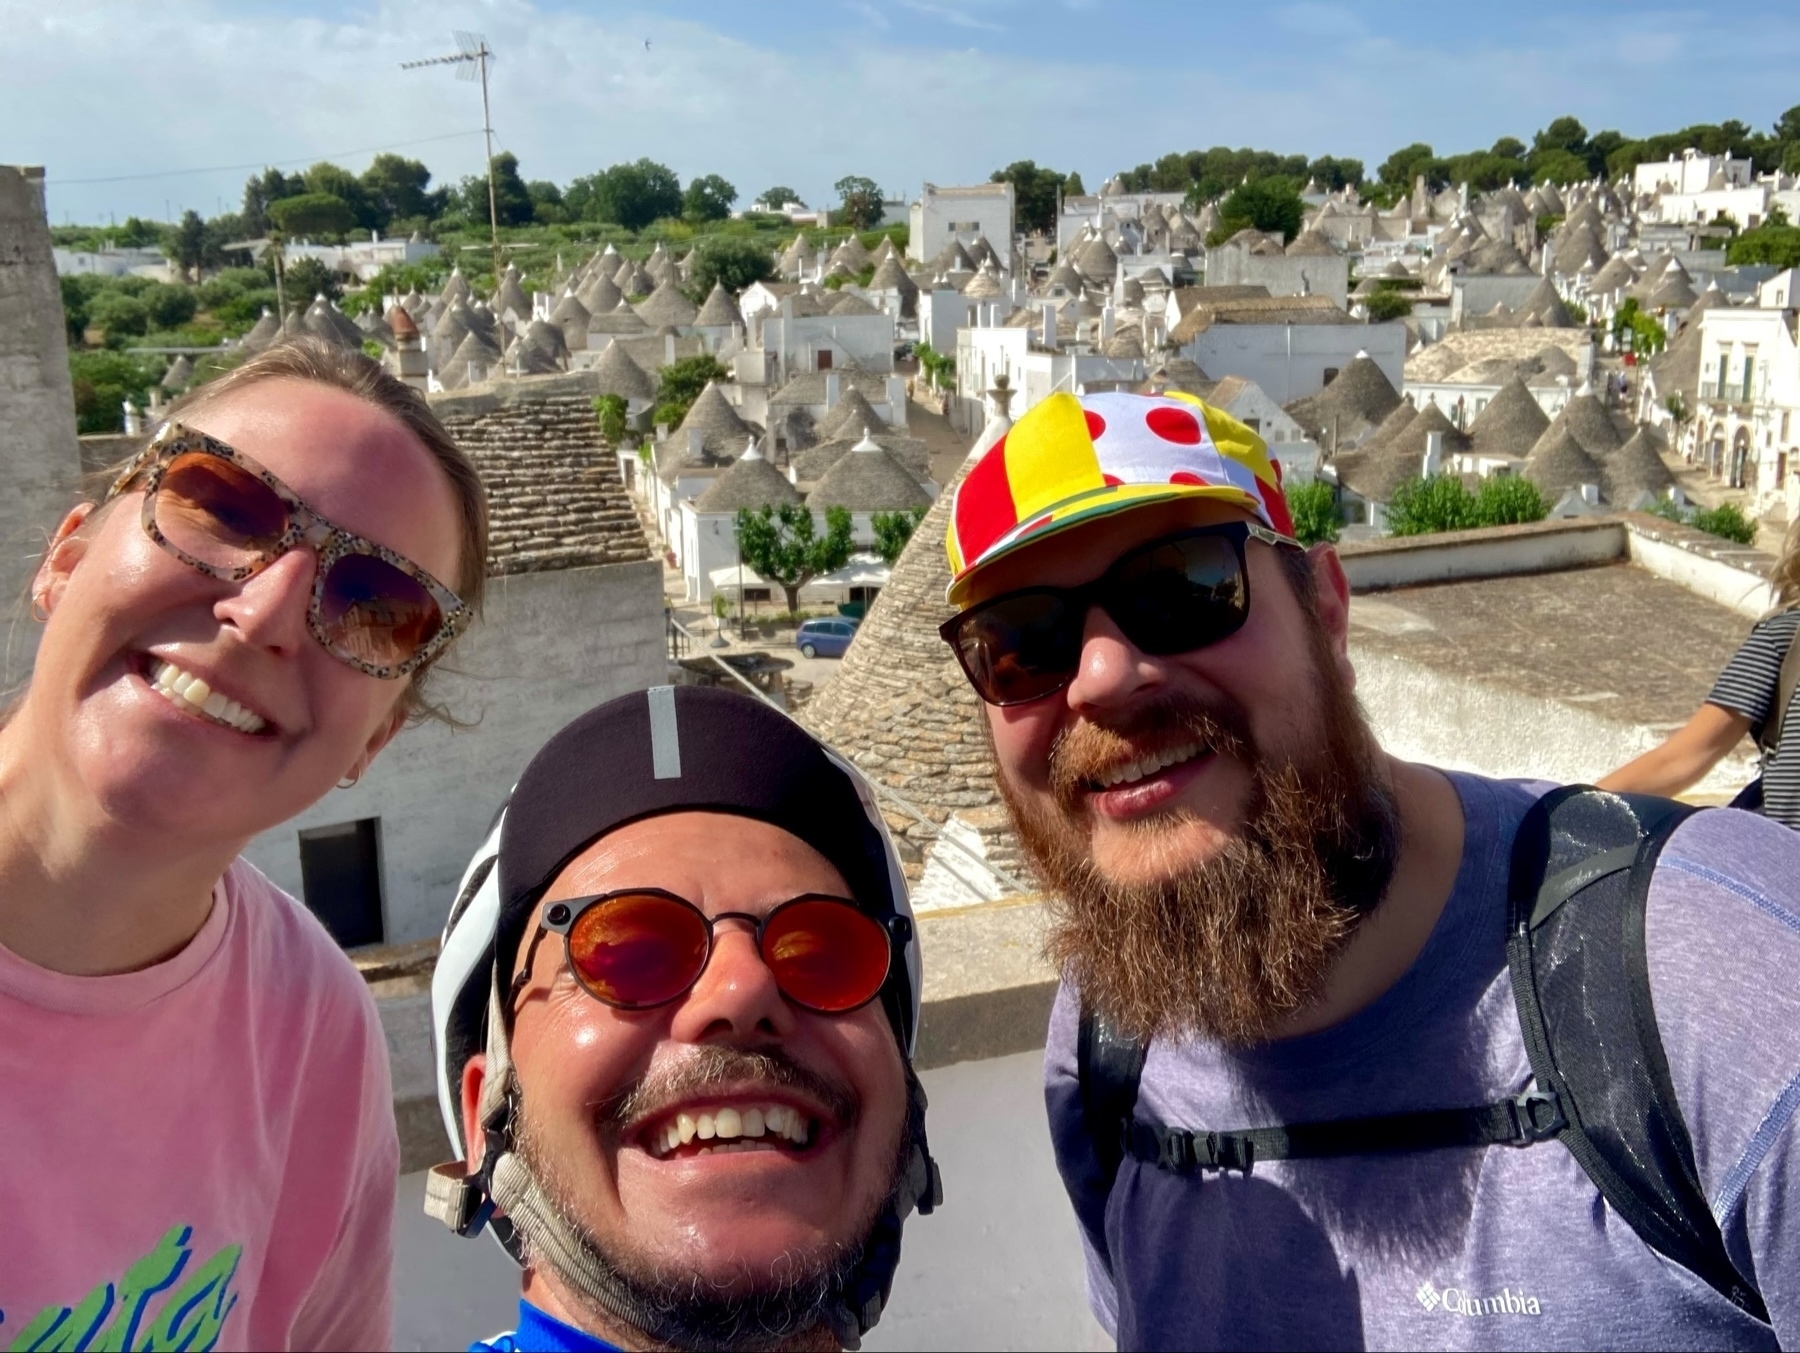 Three smiling individuals are taking a selfie in front of a scenic background featuring traditional white conical-roofed houses. One person is wearing a bike helmet, another has a colorful cap, and the third is wearing sunglasses. The background shows a picturesque landscape. 